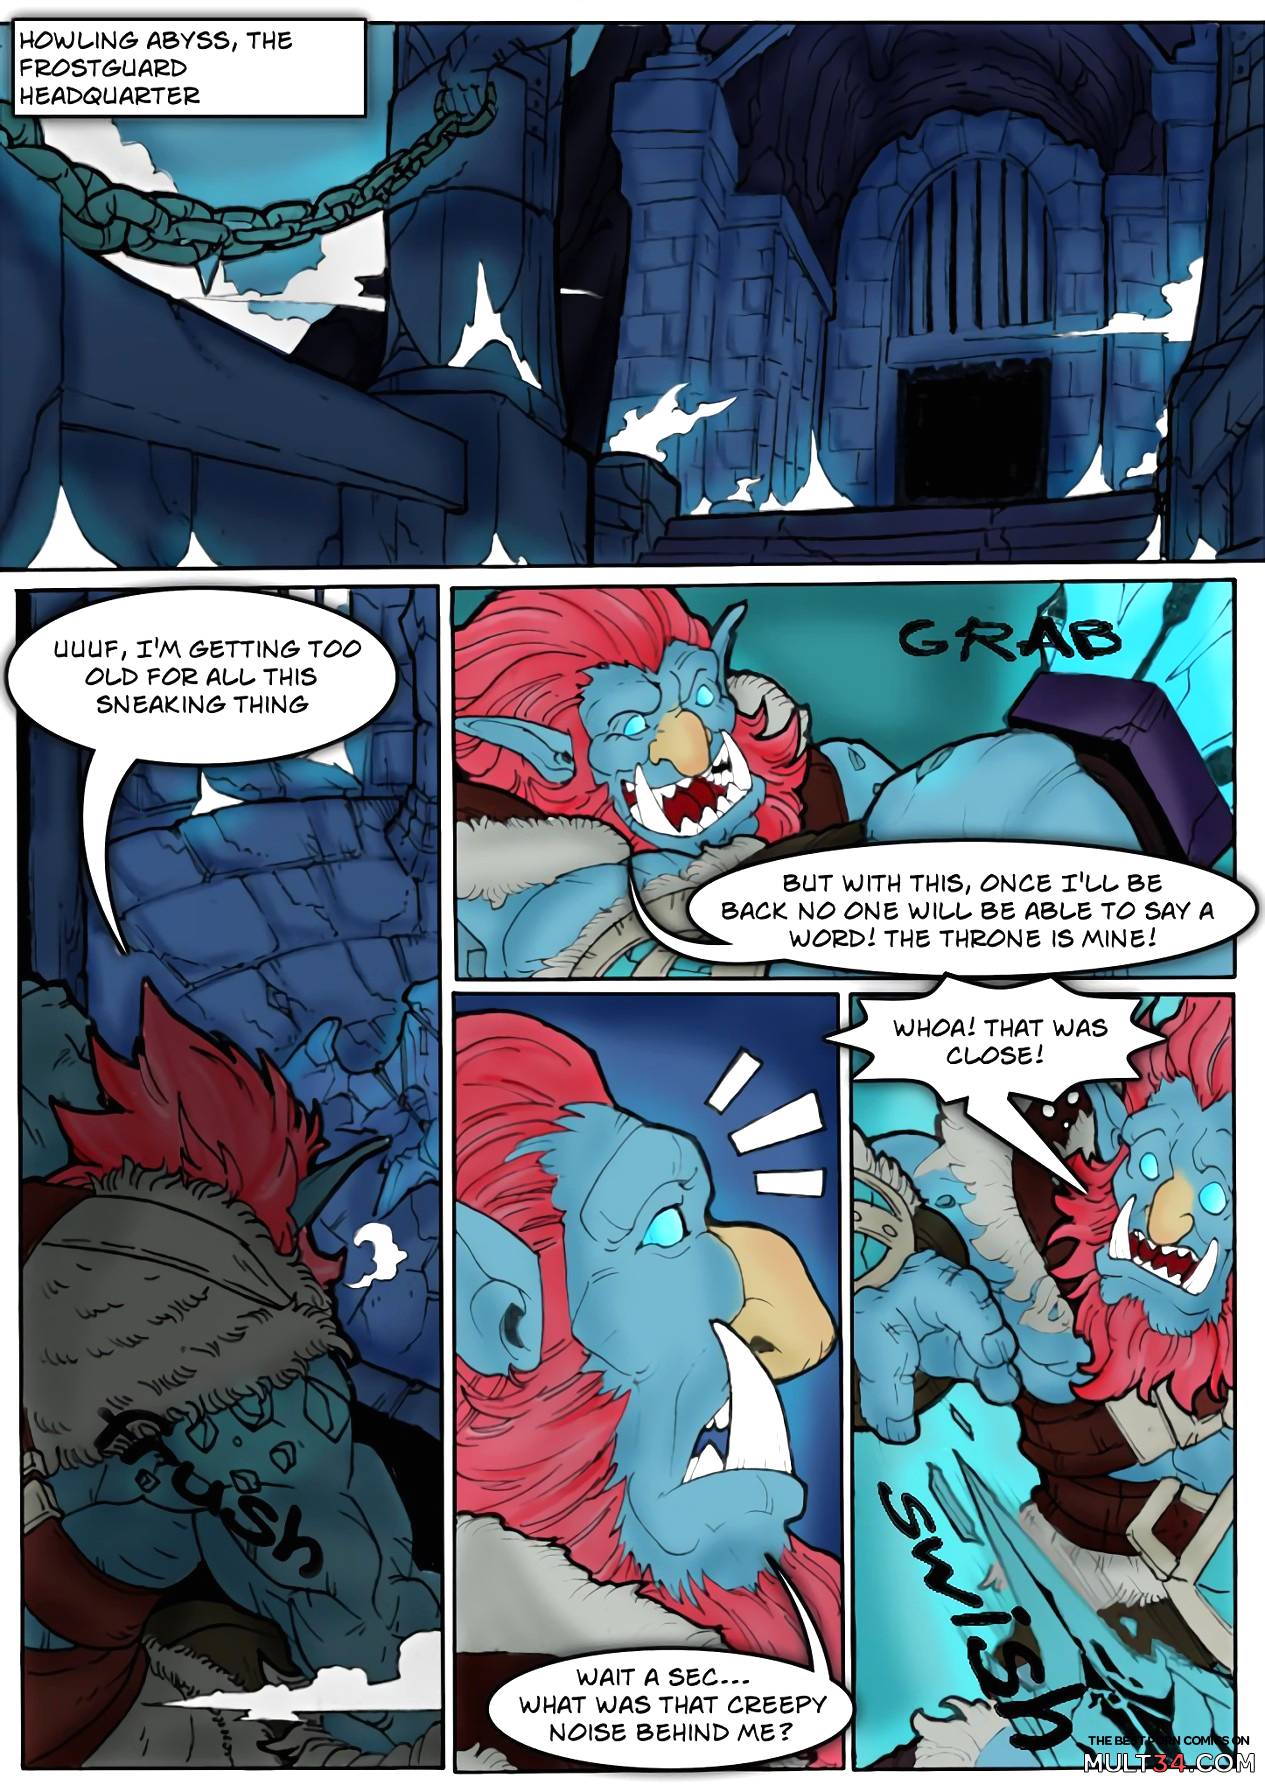 Tales of the Troll King ch. 1 - 3 ] [Colorized] page 3